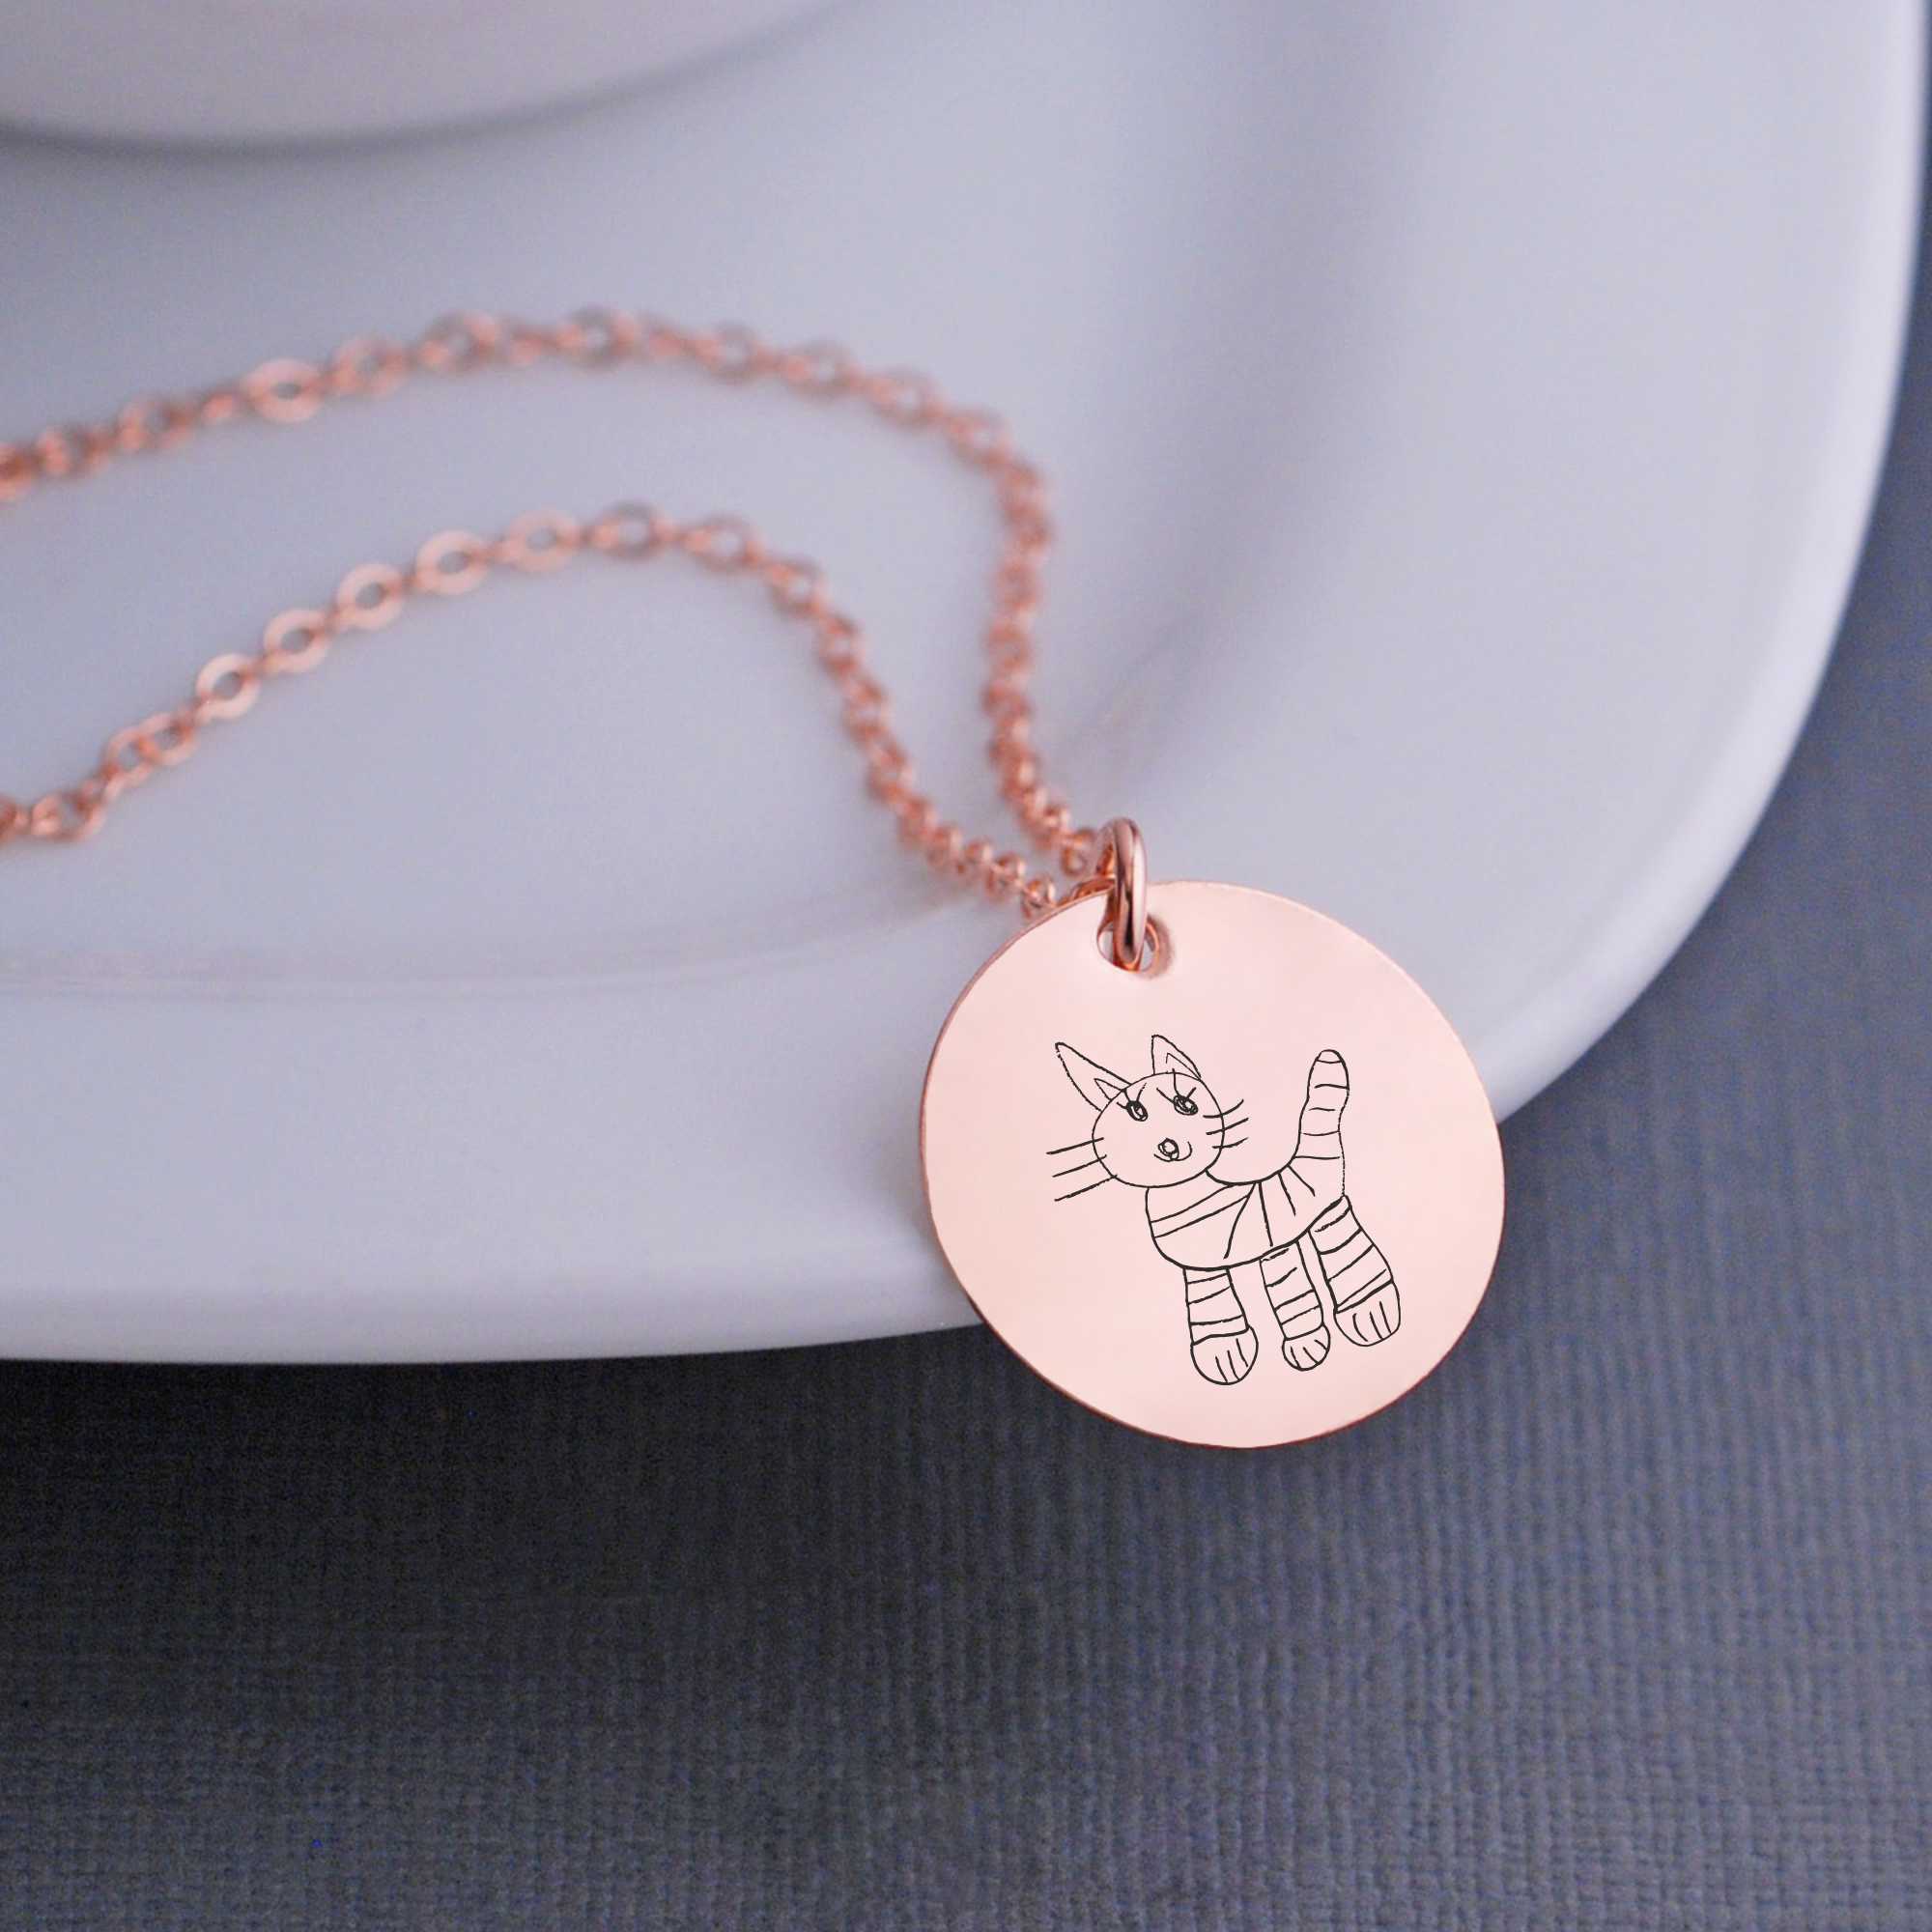 Child's Artwork 3/4 inch Necklace – Necklace – georgie designs personalized jewelry